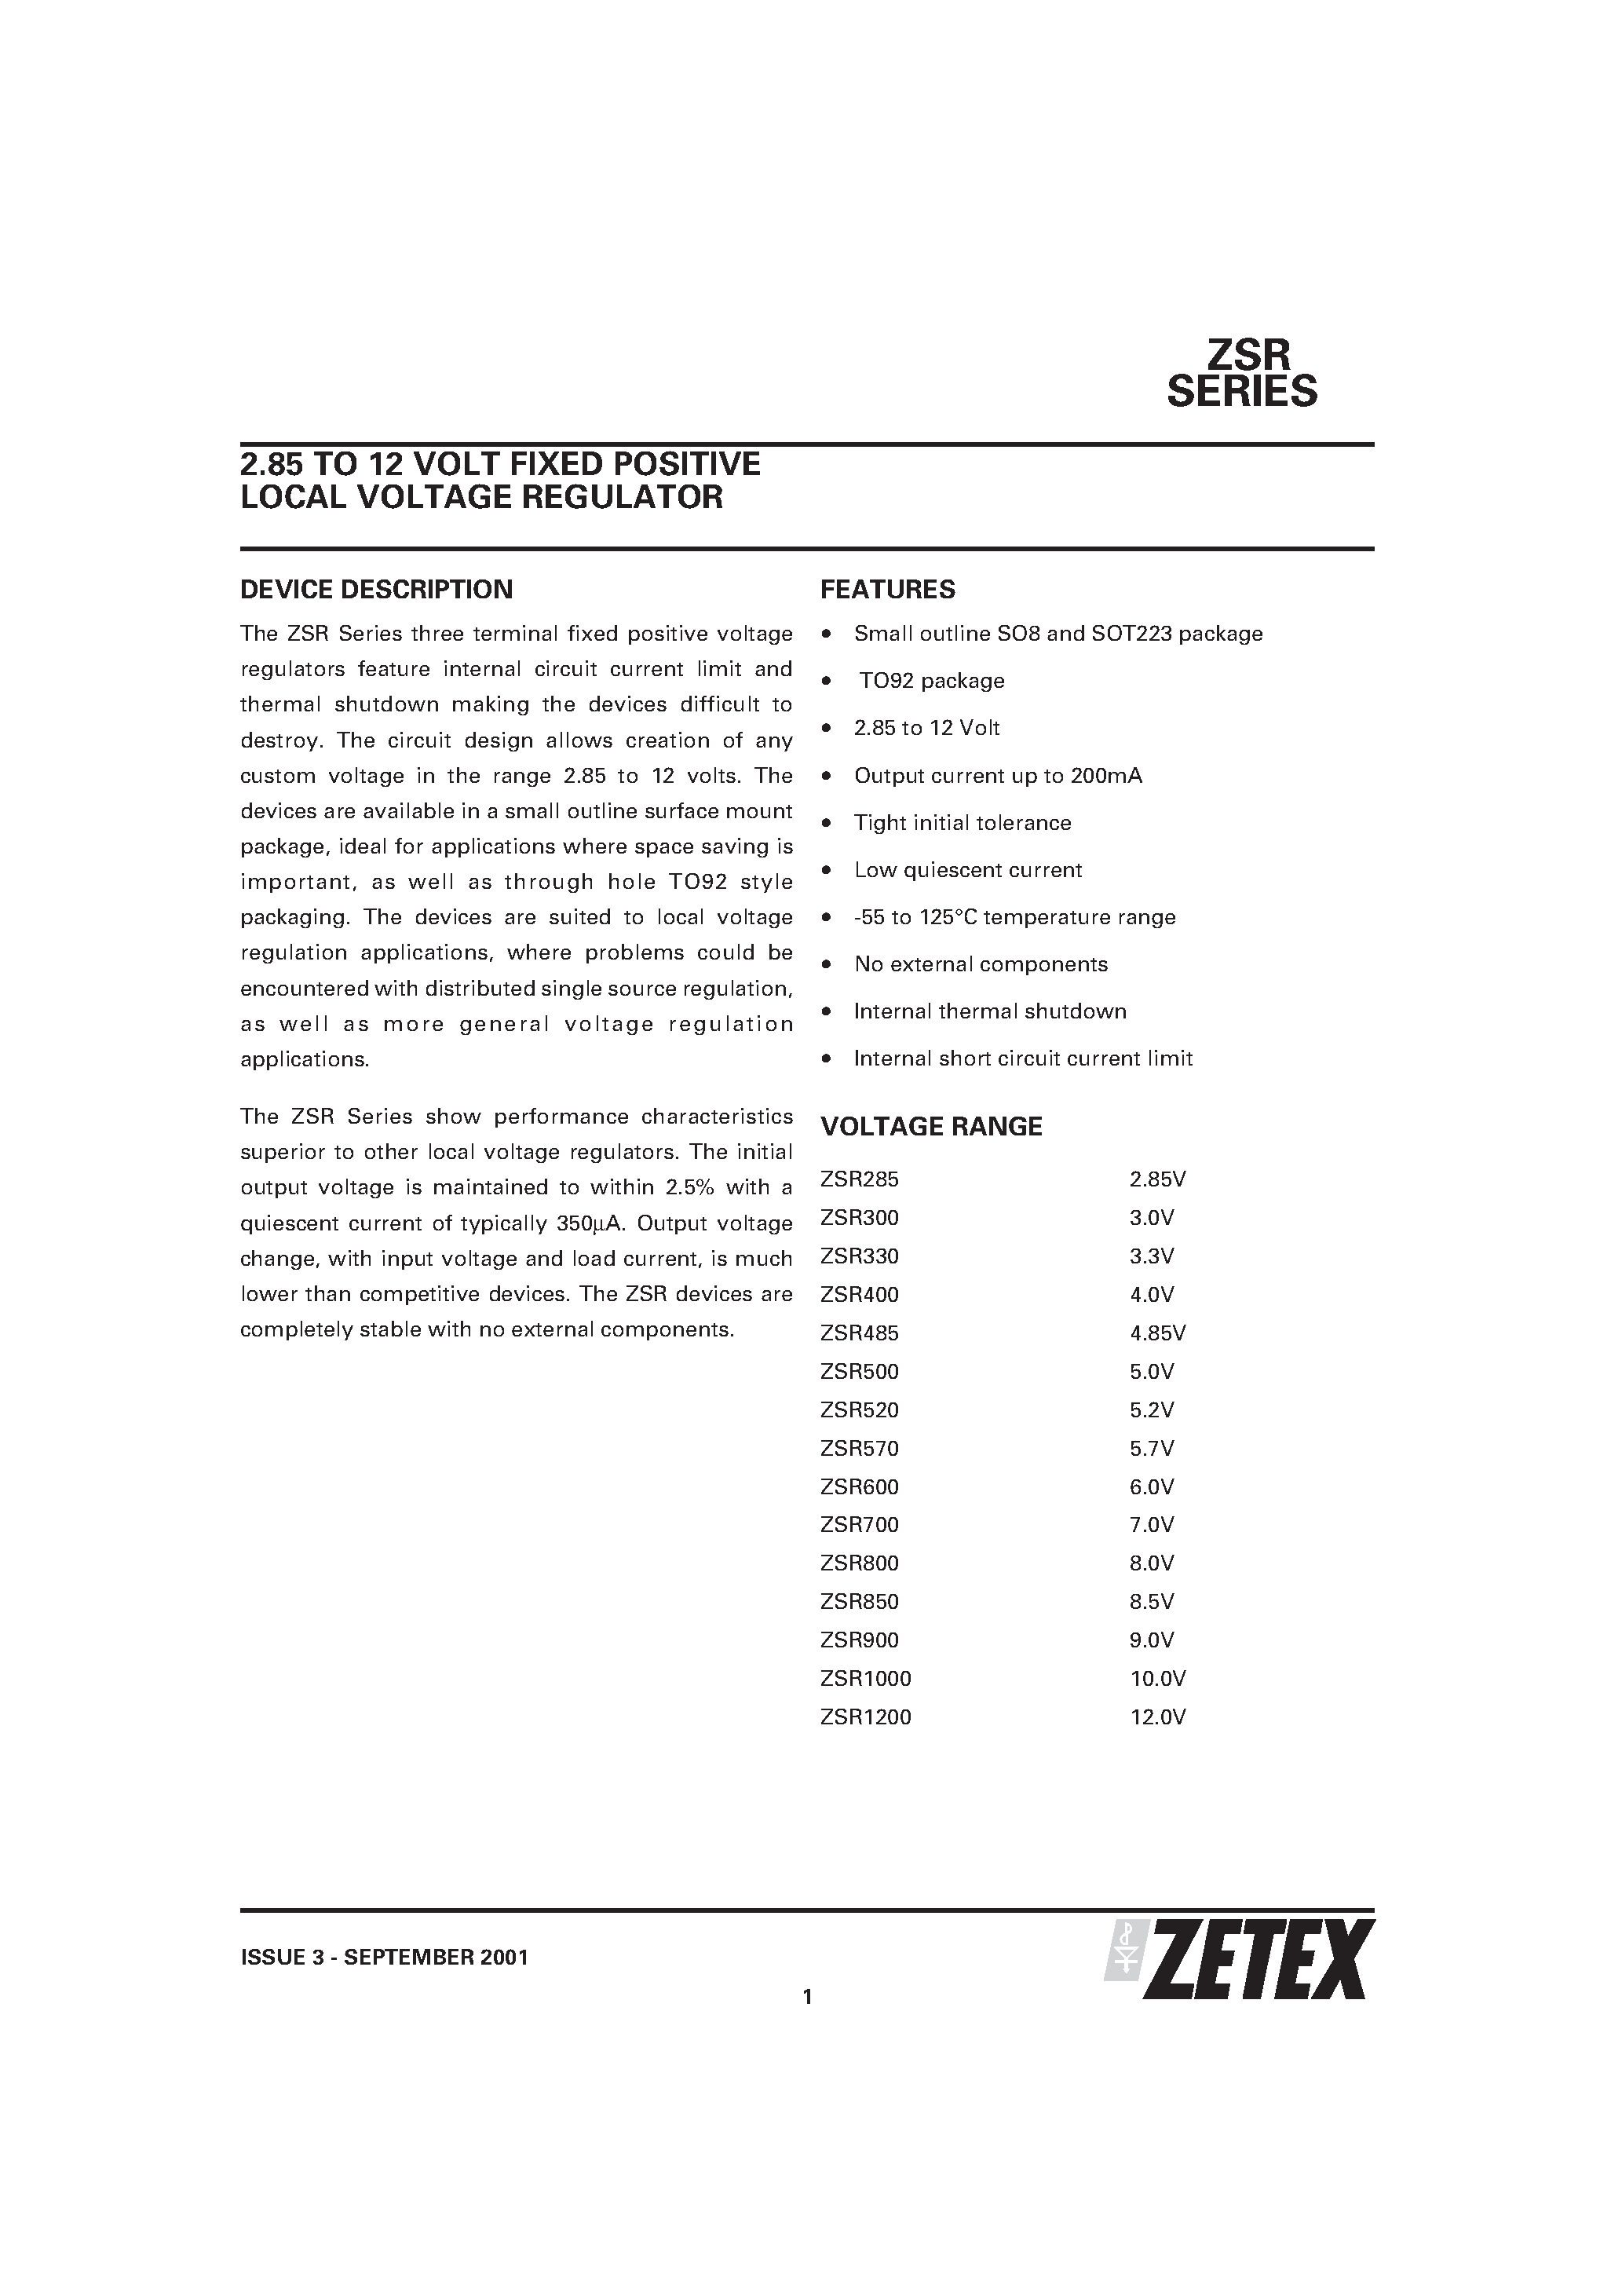 Datasheet ZSR485G - 2.85 TO 12 VOLT FIXED POSITIVE LOCAL VOLTAGE REGULATOR page 1